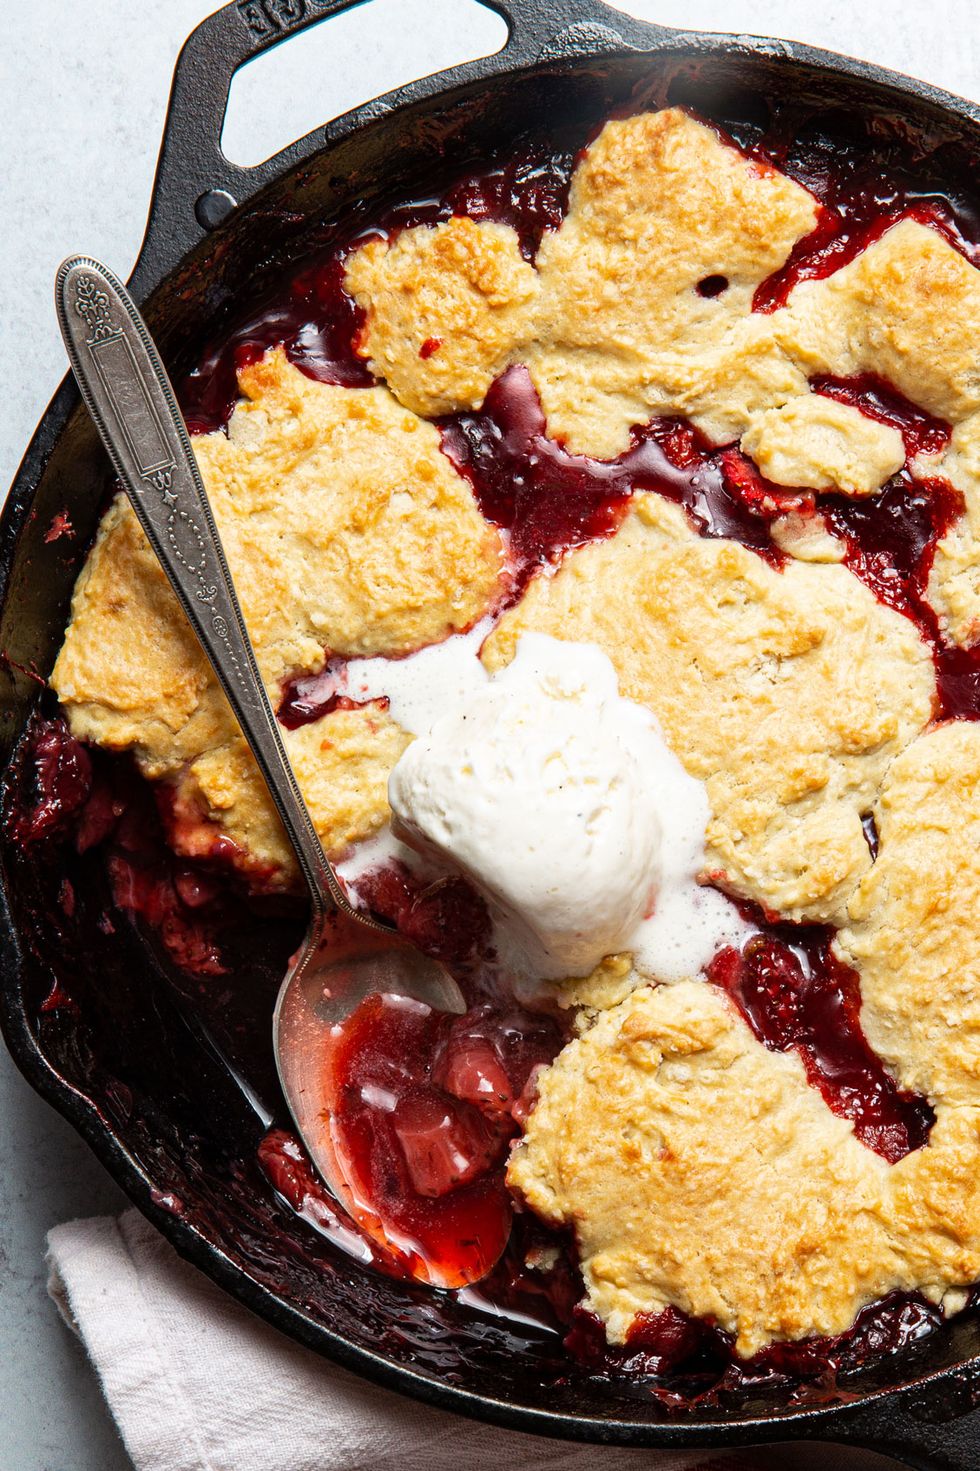 17 Easy Fruit Cobbler Recipes - How To Make The Best Cobblers